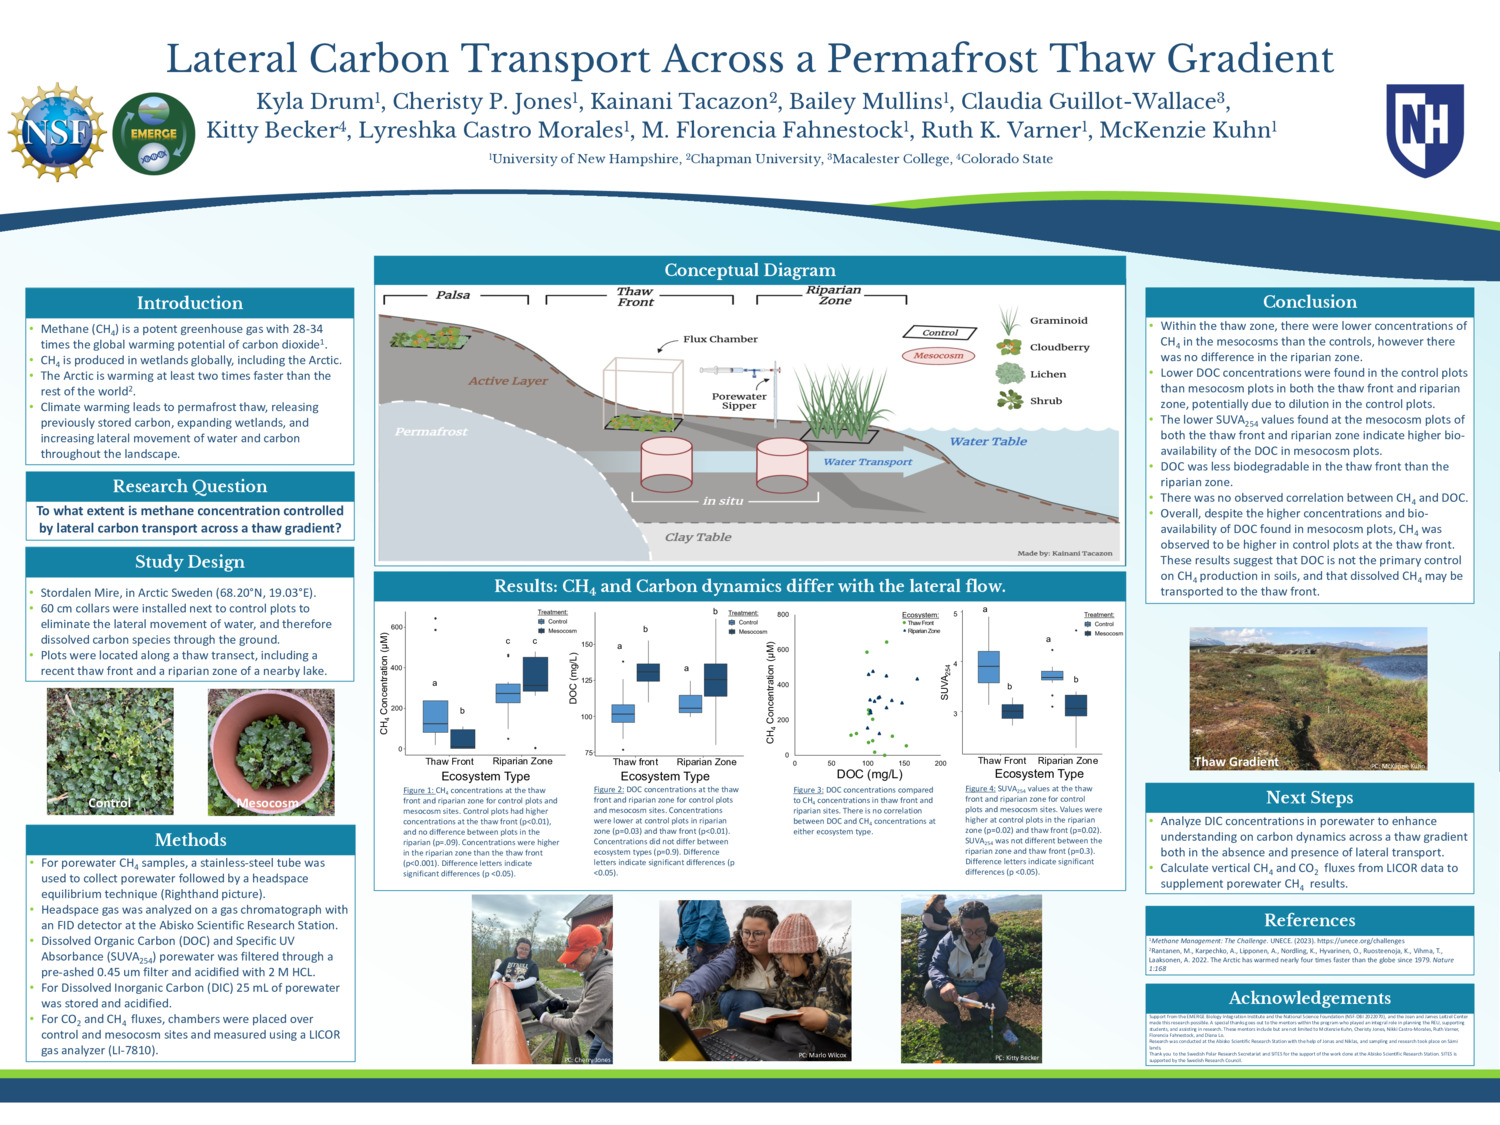 Lateral Carbon Transport Across A Permafrost Thaw Gradient by rakerwin